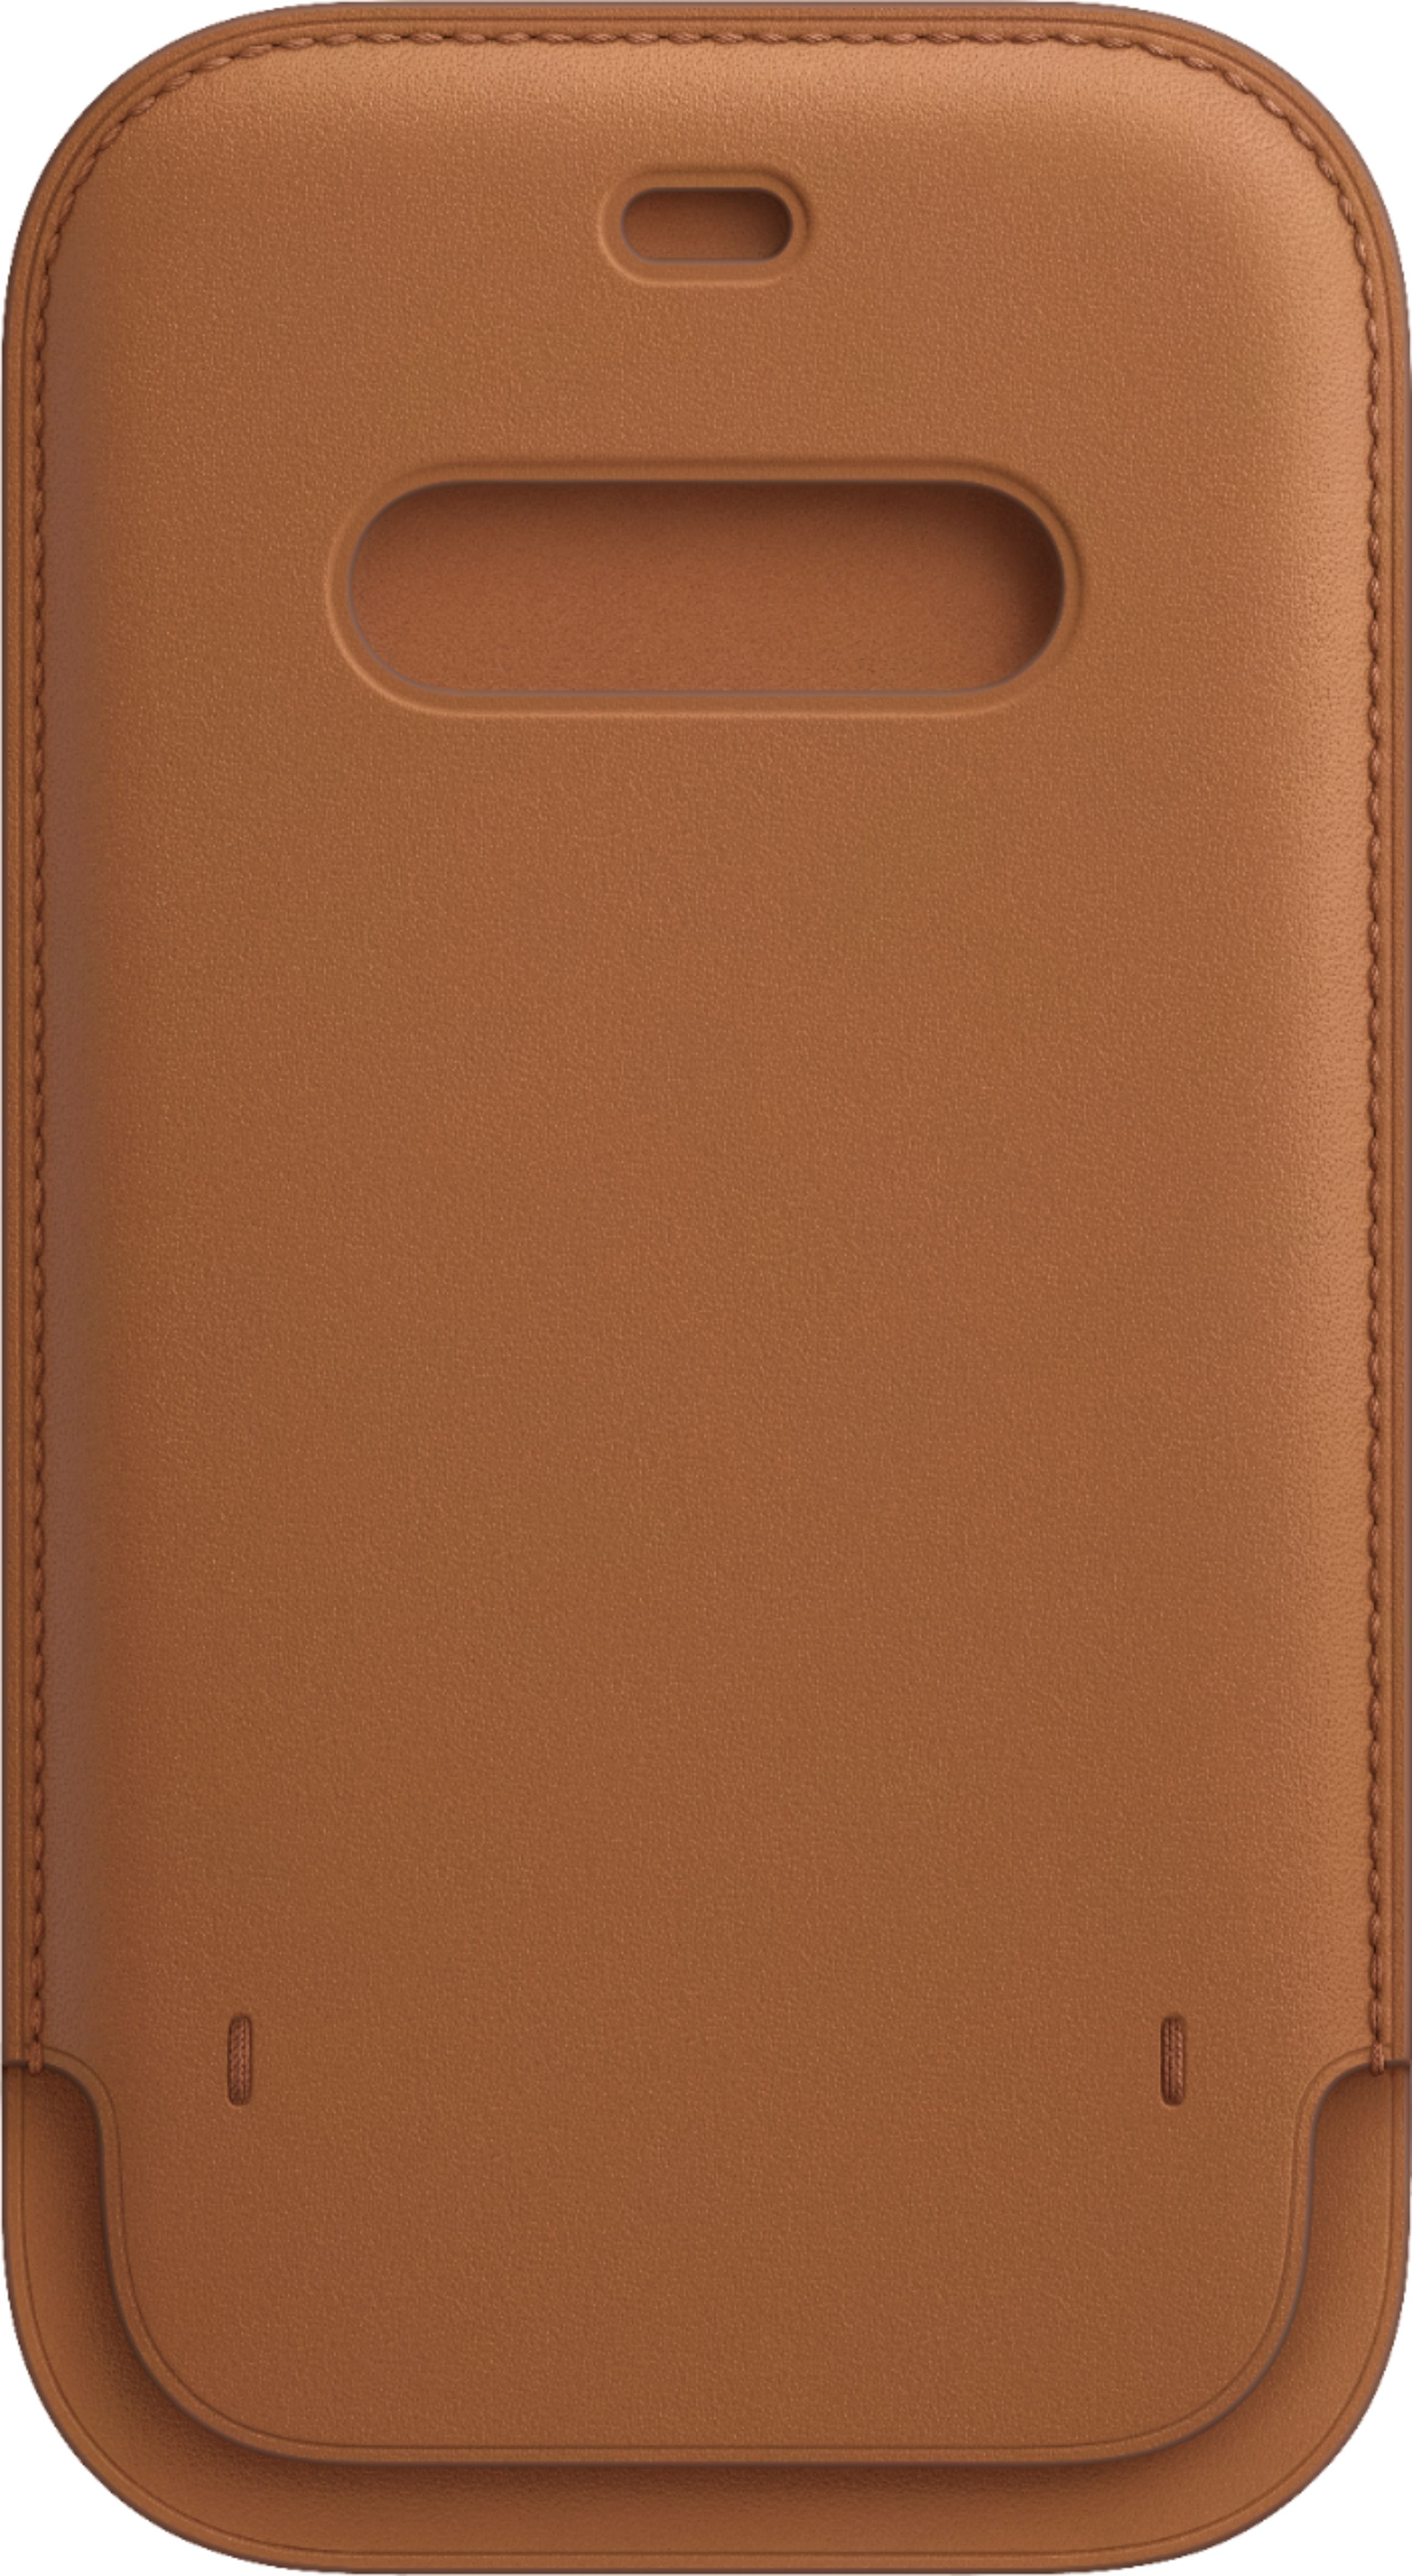 Apple - iPhone 12 Pro Max Leather Sleeve with MagSafe - Saddle Brown